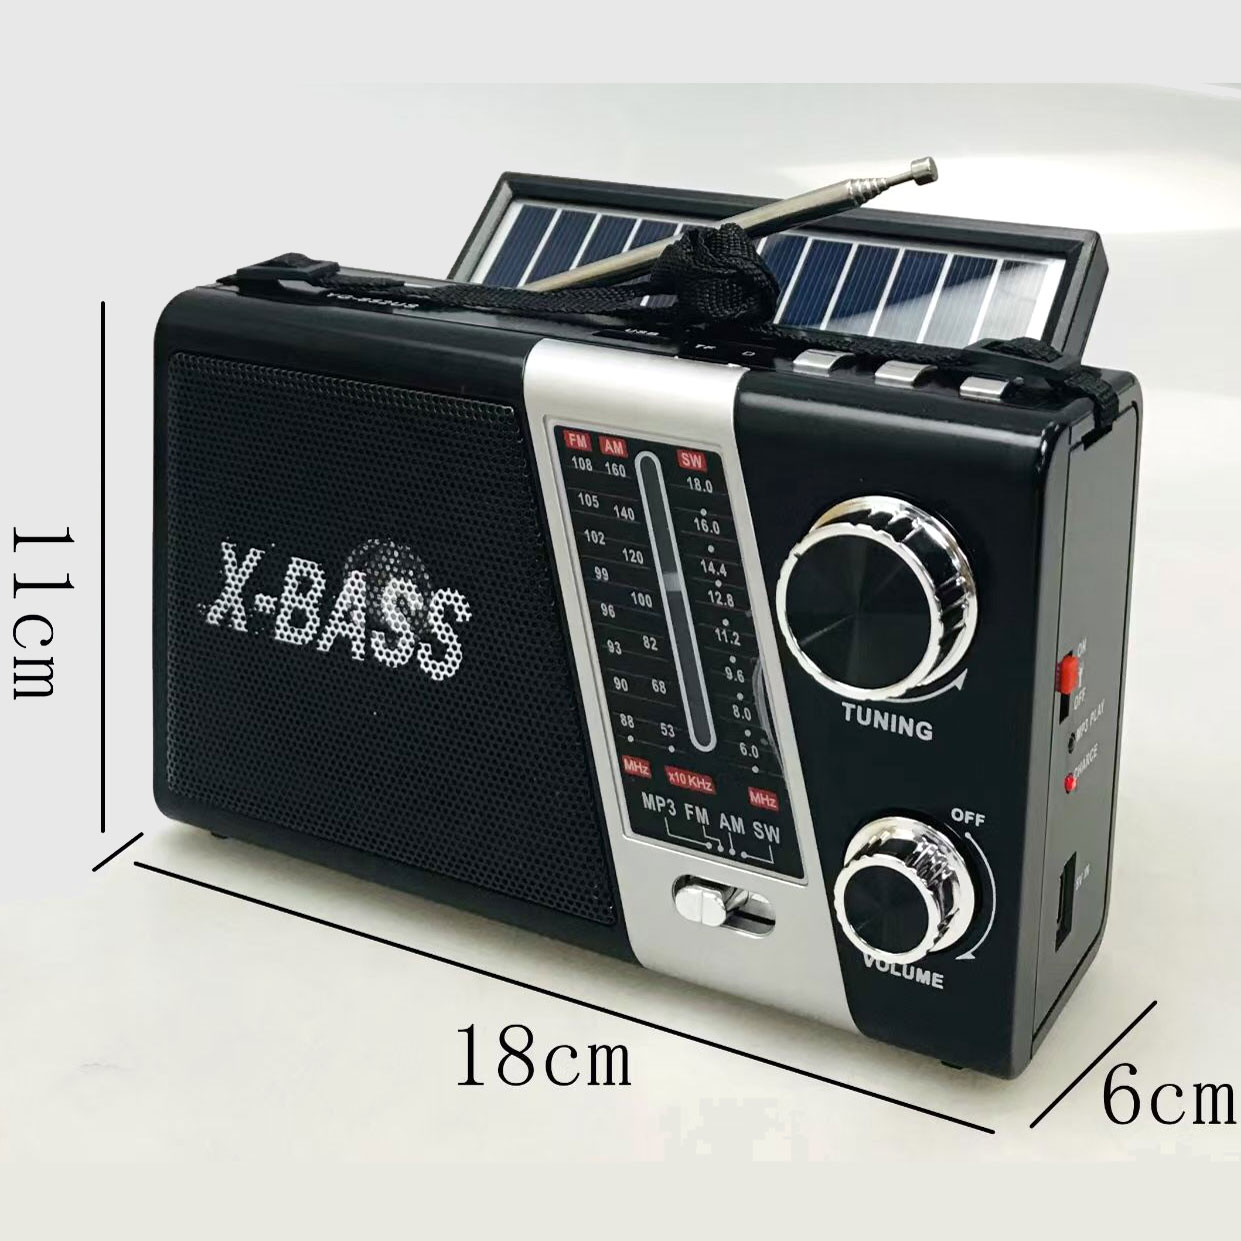 X Bass AM FM Radio Portable Speaker with Solar Charge YG852US [No Bluetooth Feature] (Black)